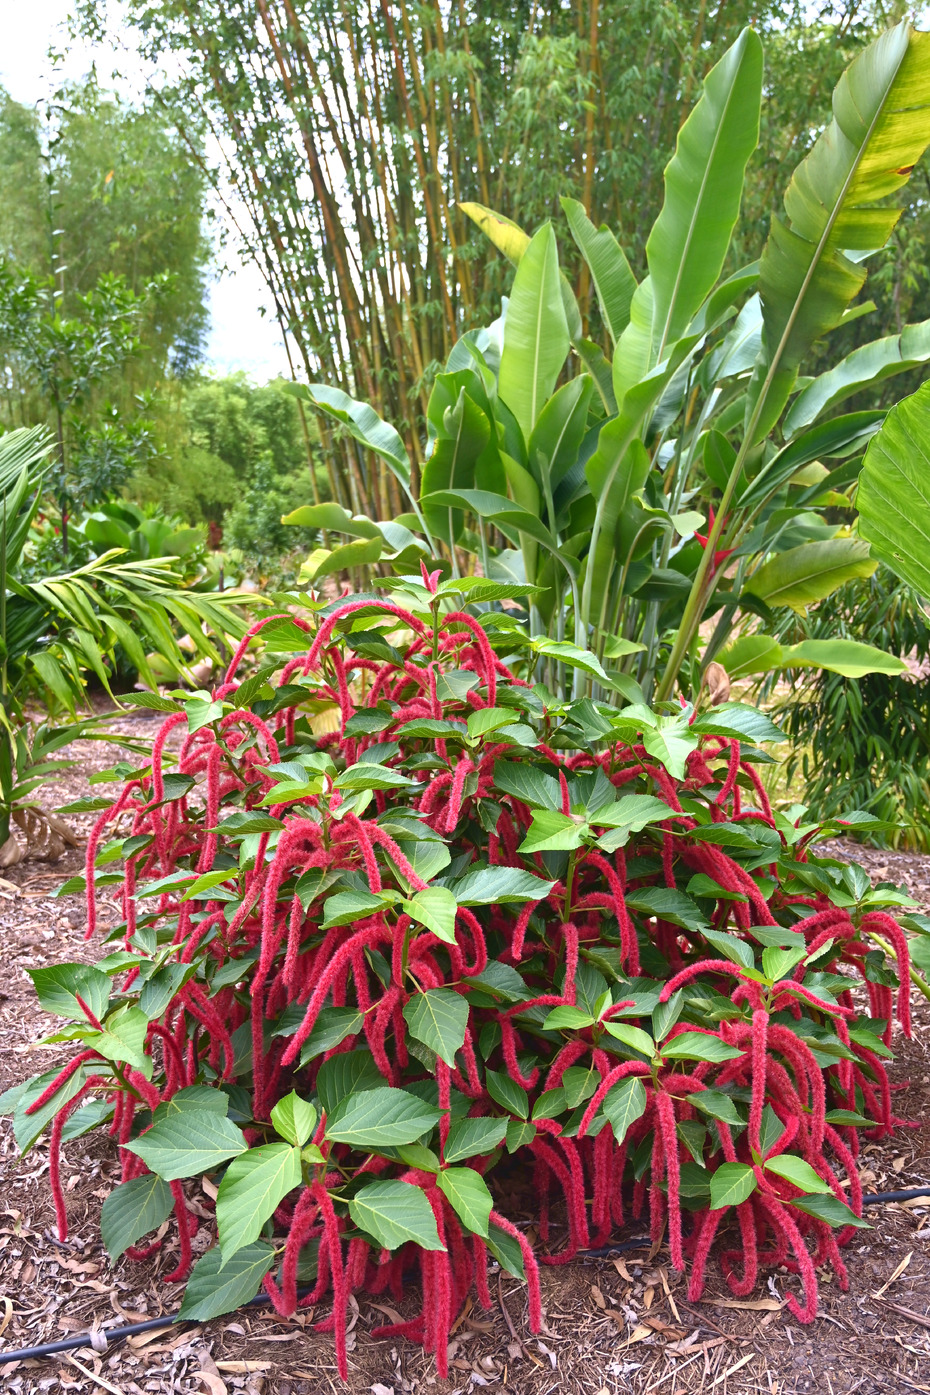 acalypha hispida (red hot cat's tail) - plants